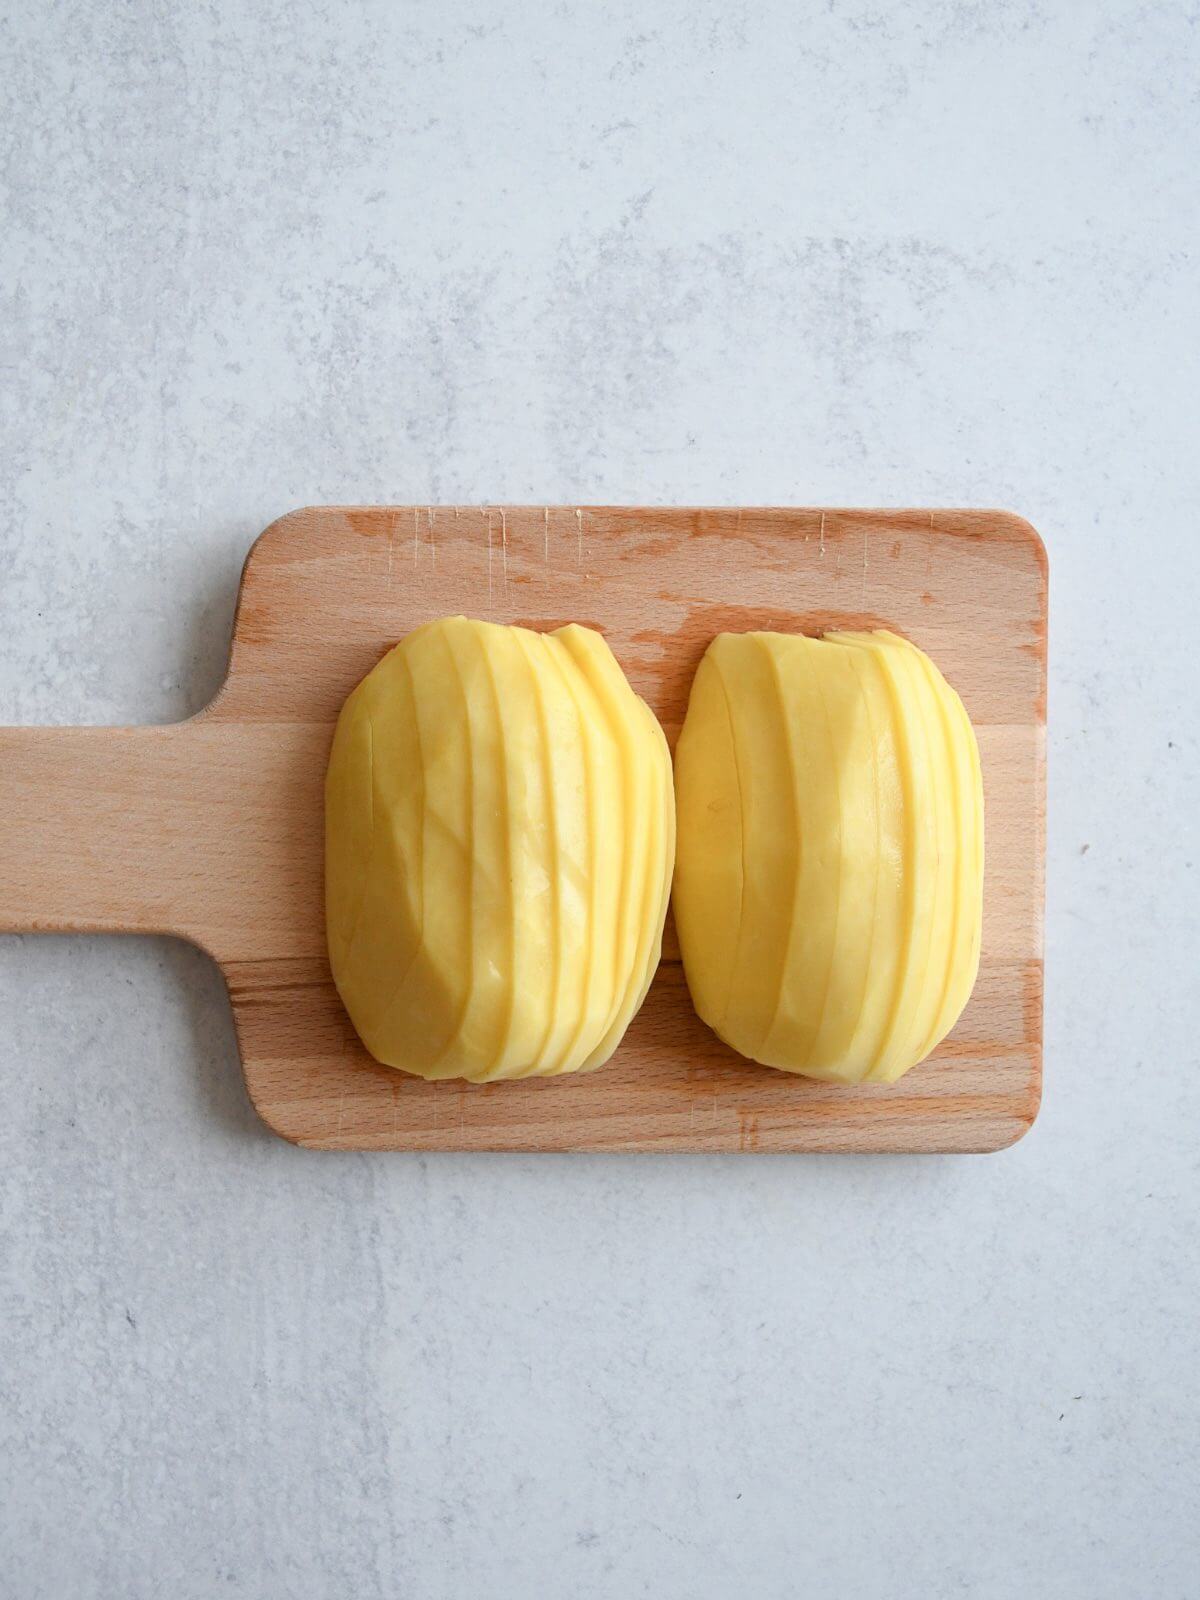 peeled potato cut in half lengthwise and cut into slices.